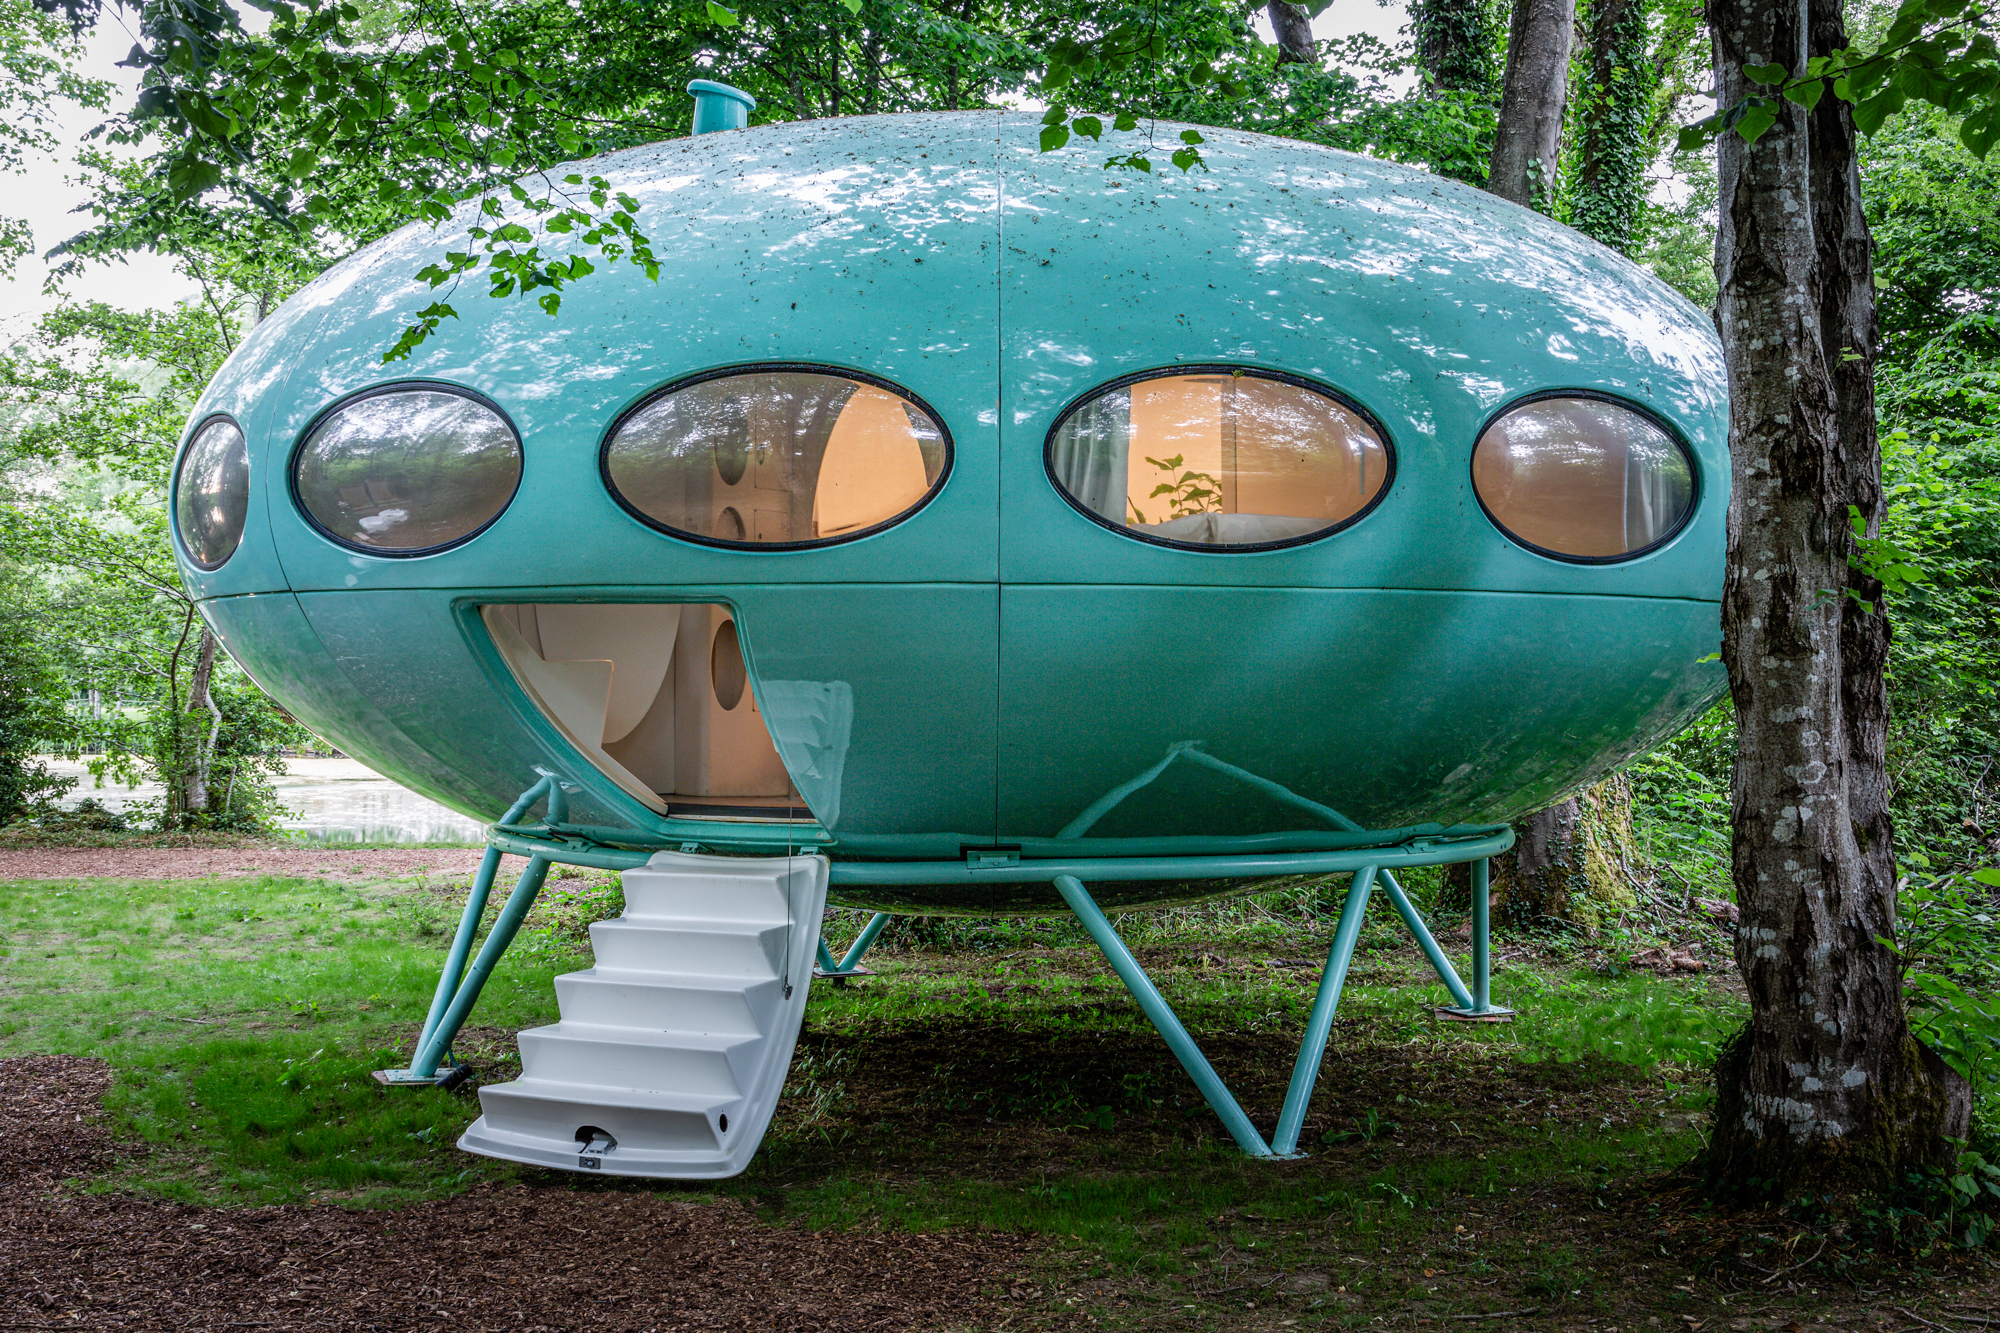 1960s Futuro House restored in Marston Park padstyle.com